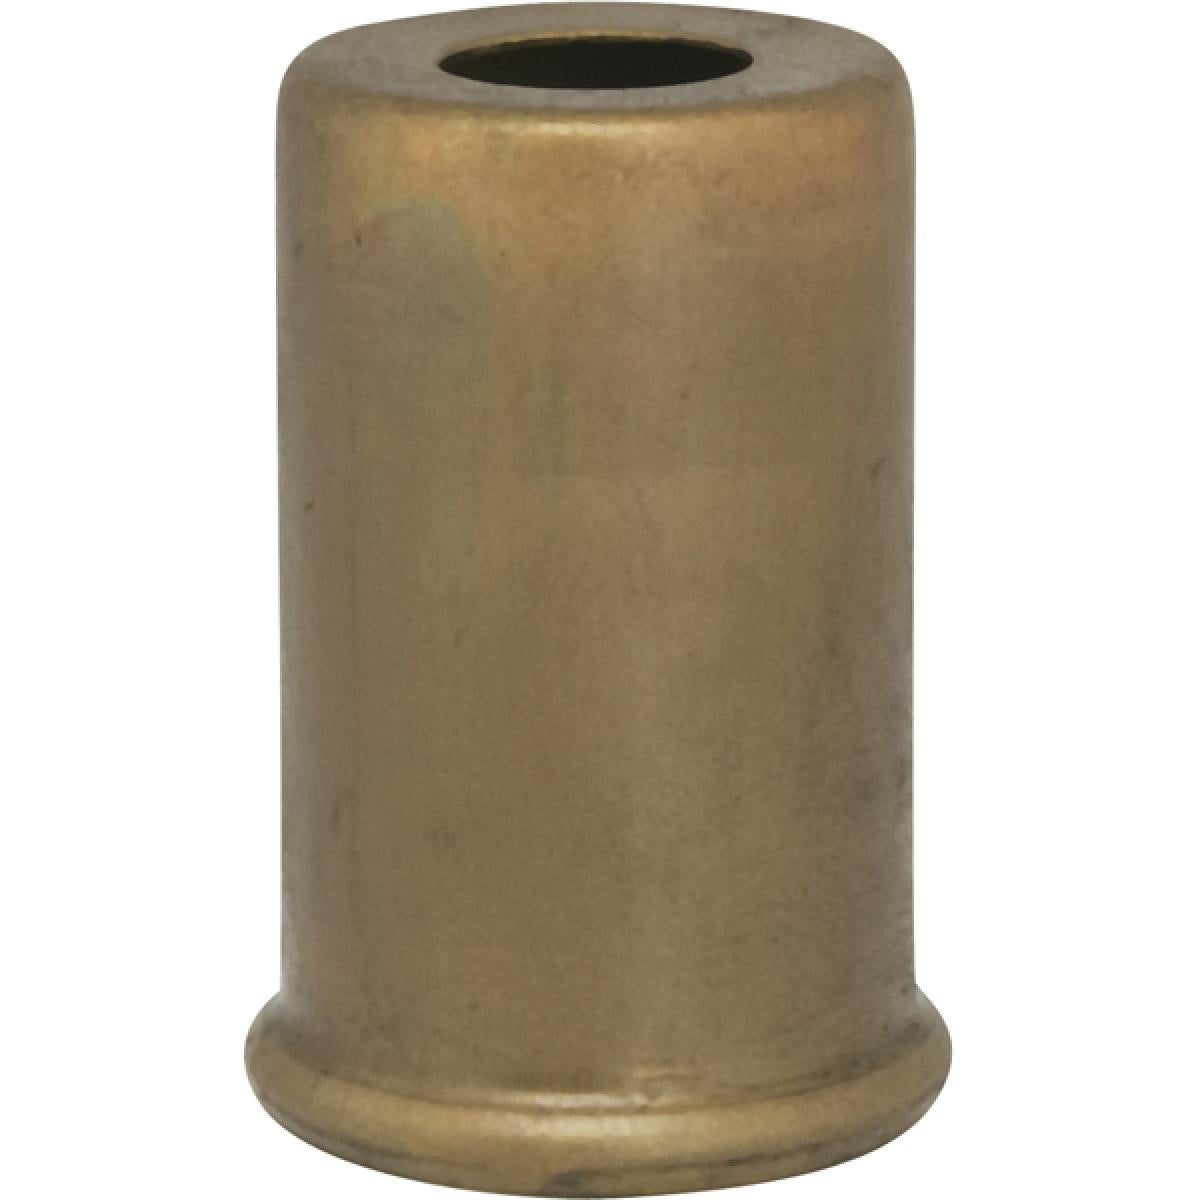 Satco 90-2224 Solid Brass Spacer 7/16" Hole 1-1/2" Height 7/8" Diameter 1" Base Diameter Unfinished